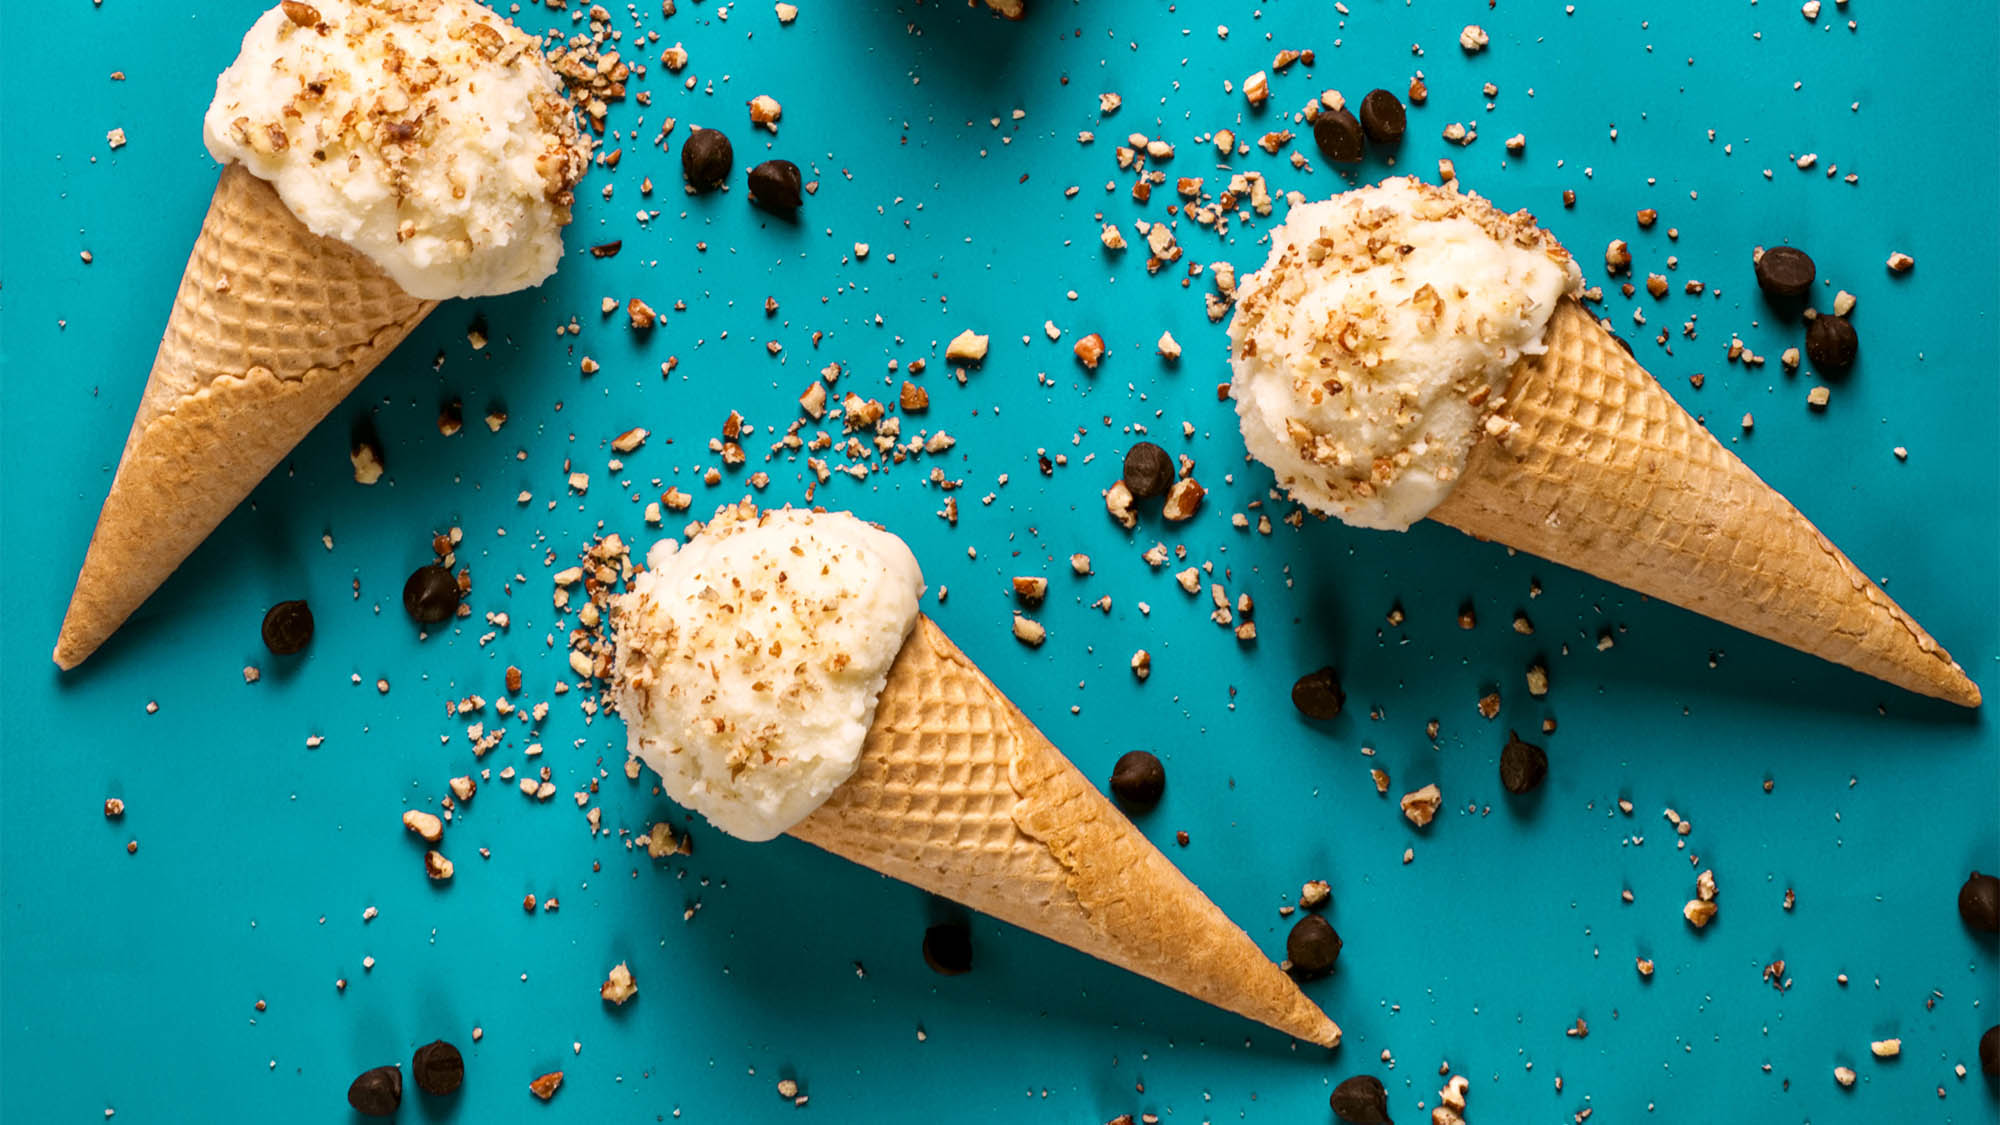 Three sugar cones with one scoop vanilla ice cream and chopped nuts resting on teal background with scattered crushed nuts